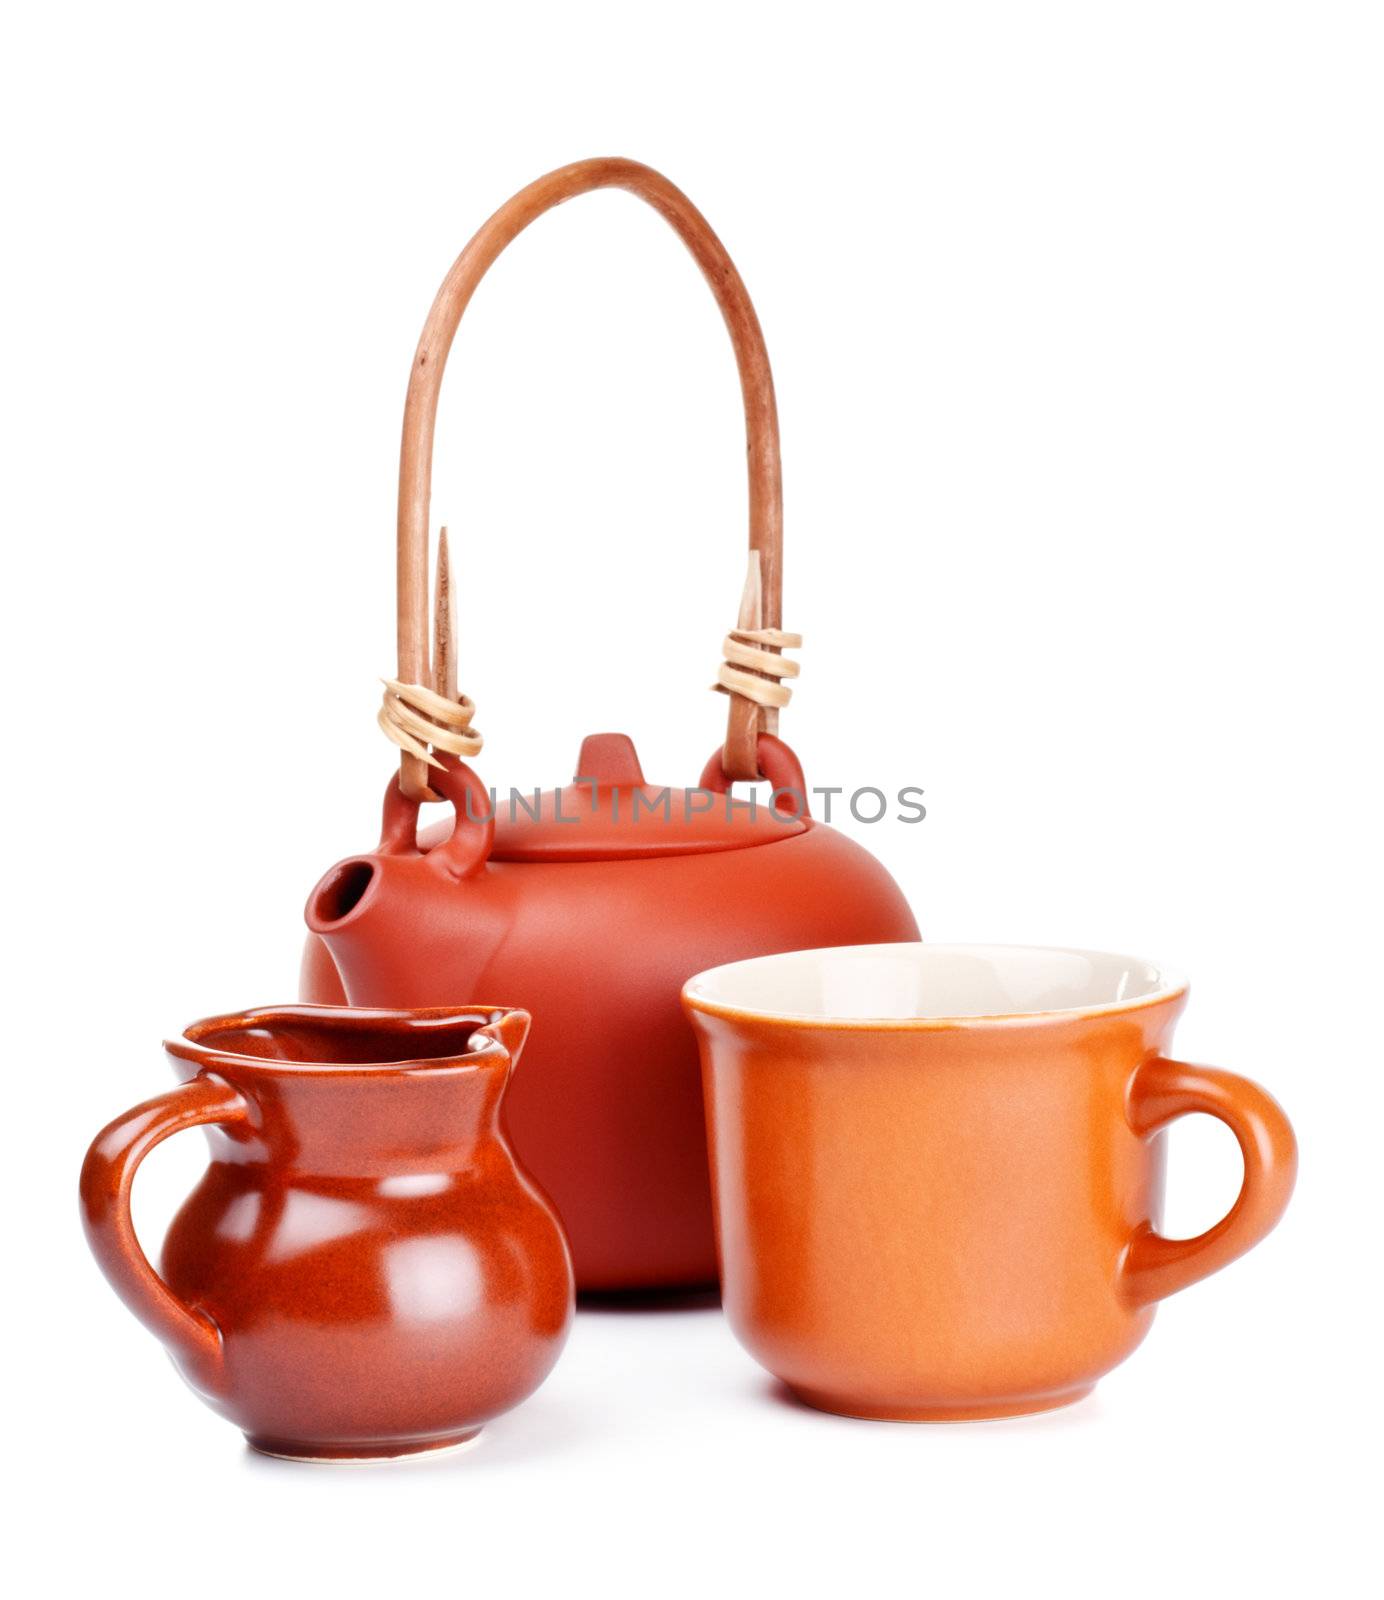 clay kettle, cup and jug isolated on white